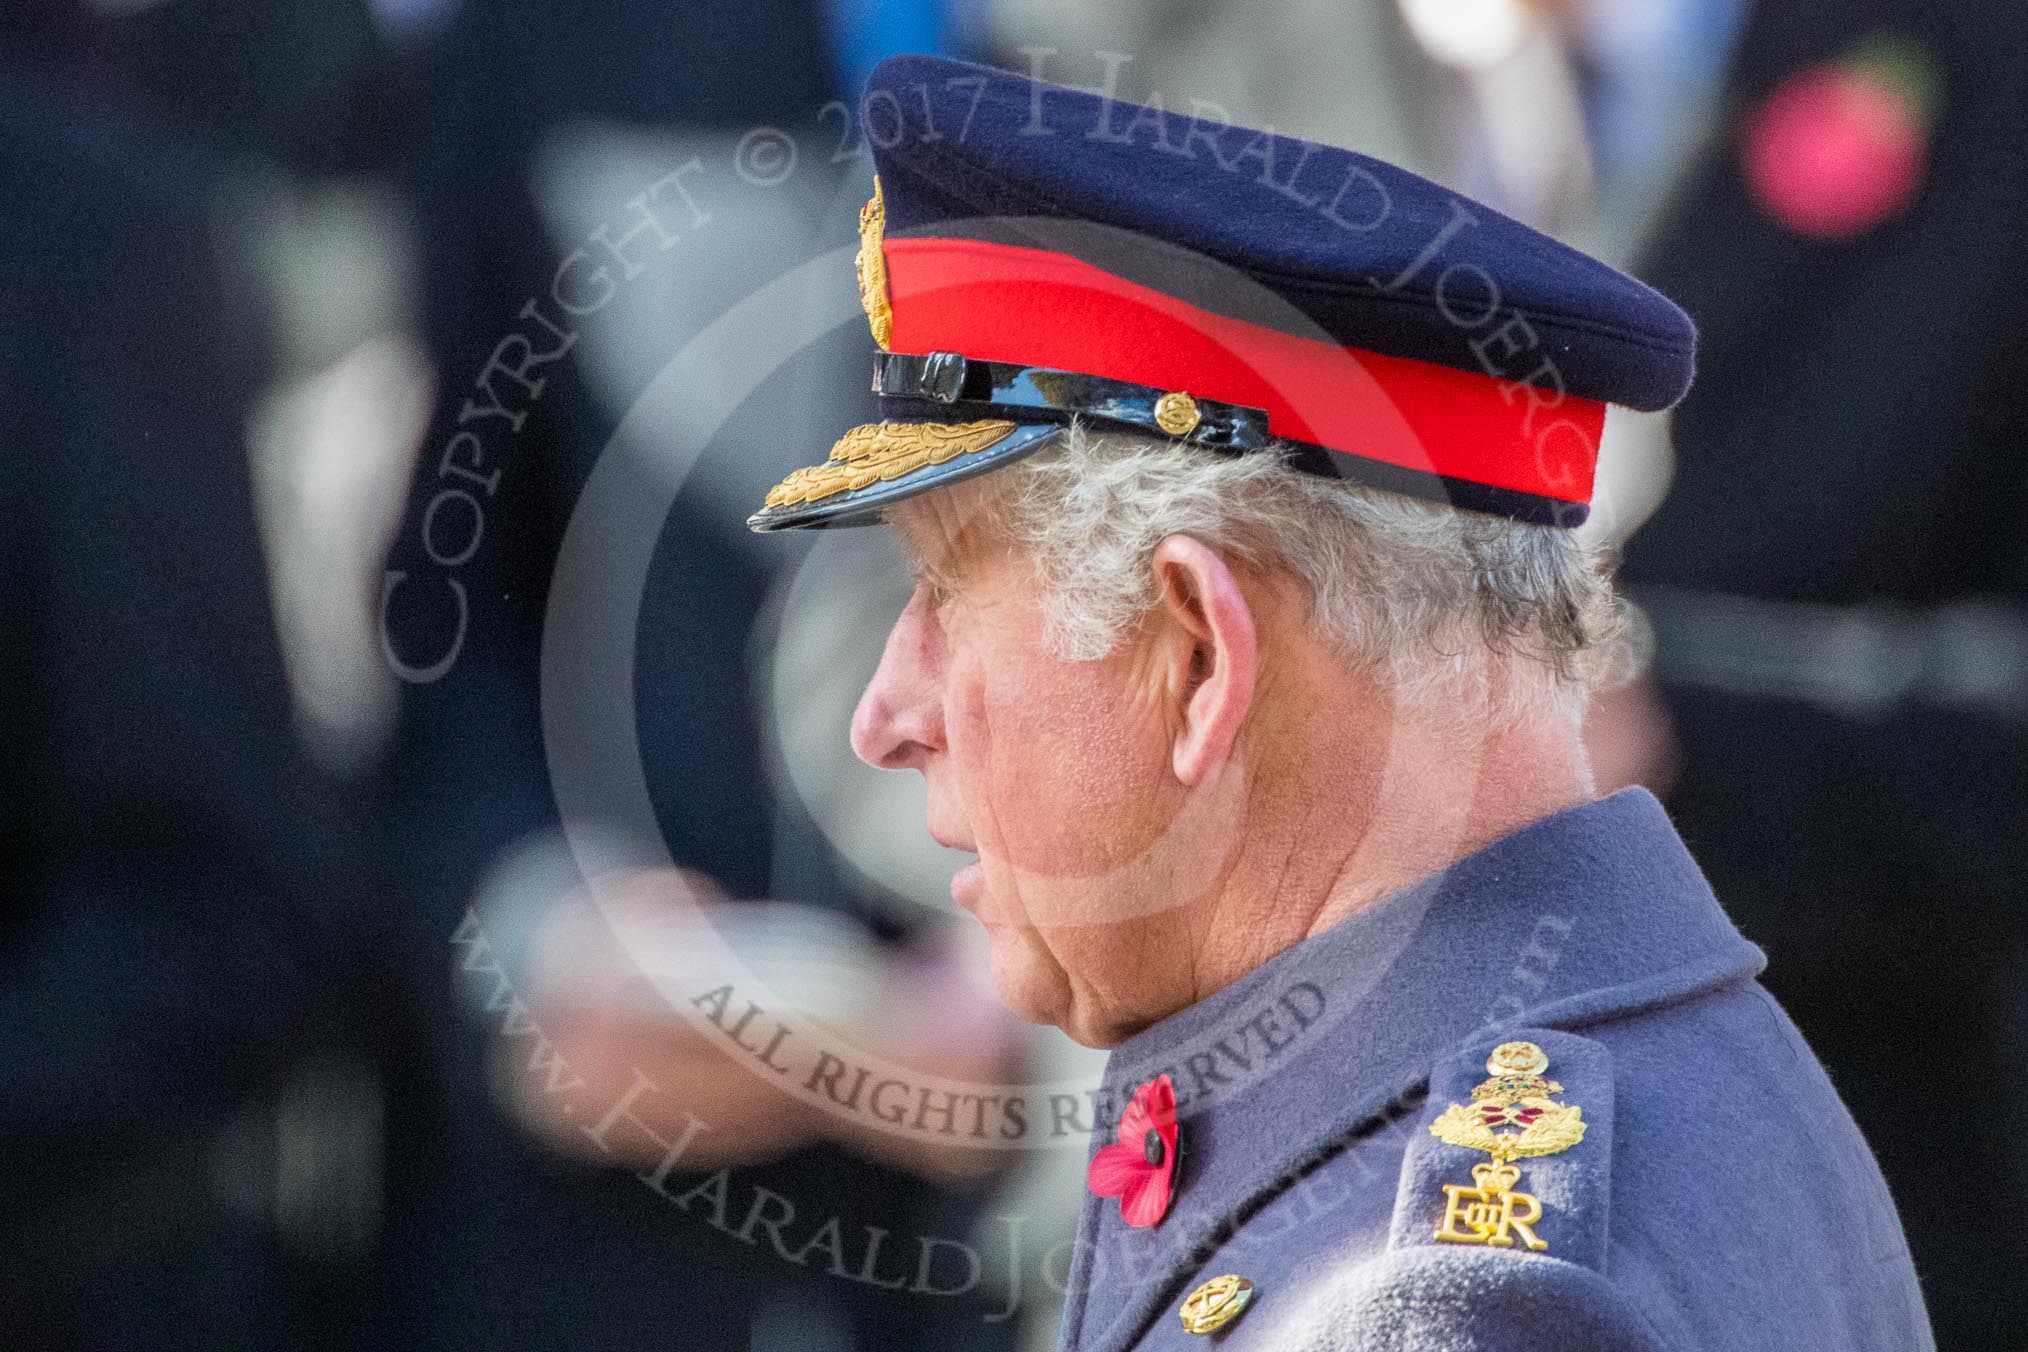 HRH The Prince of Wales (Prince Charles) during the Remembrance Sunday Cenotaph Ceremony 2018 at Horse Guards Parade, Westminster, London, 11 November 2018, 11:19.